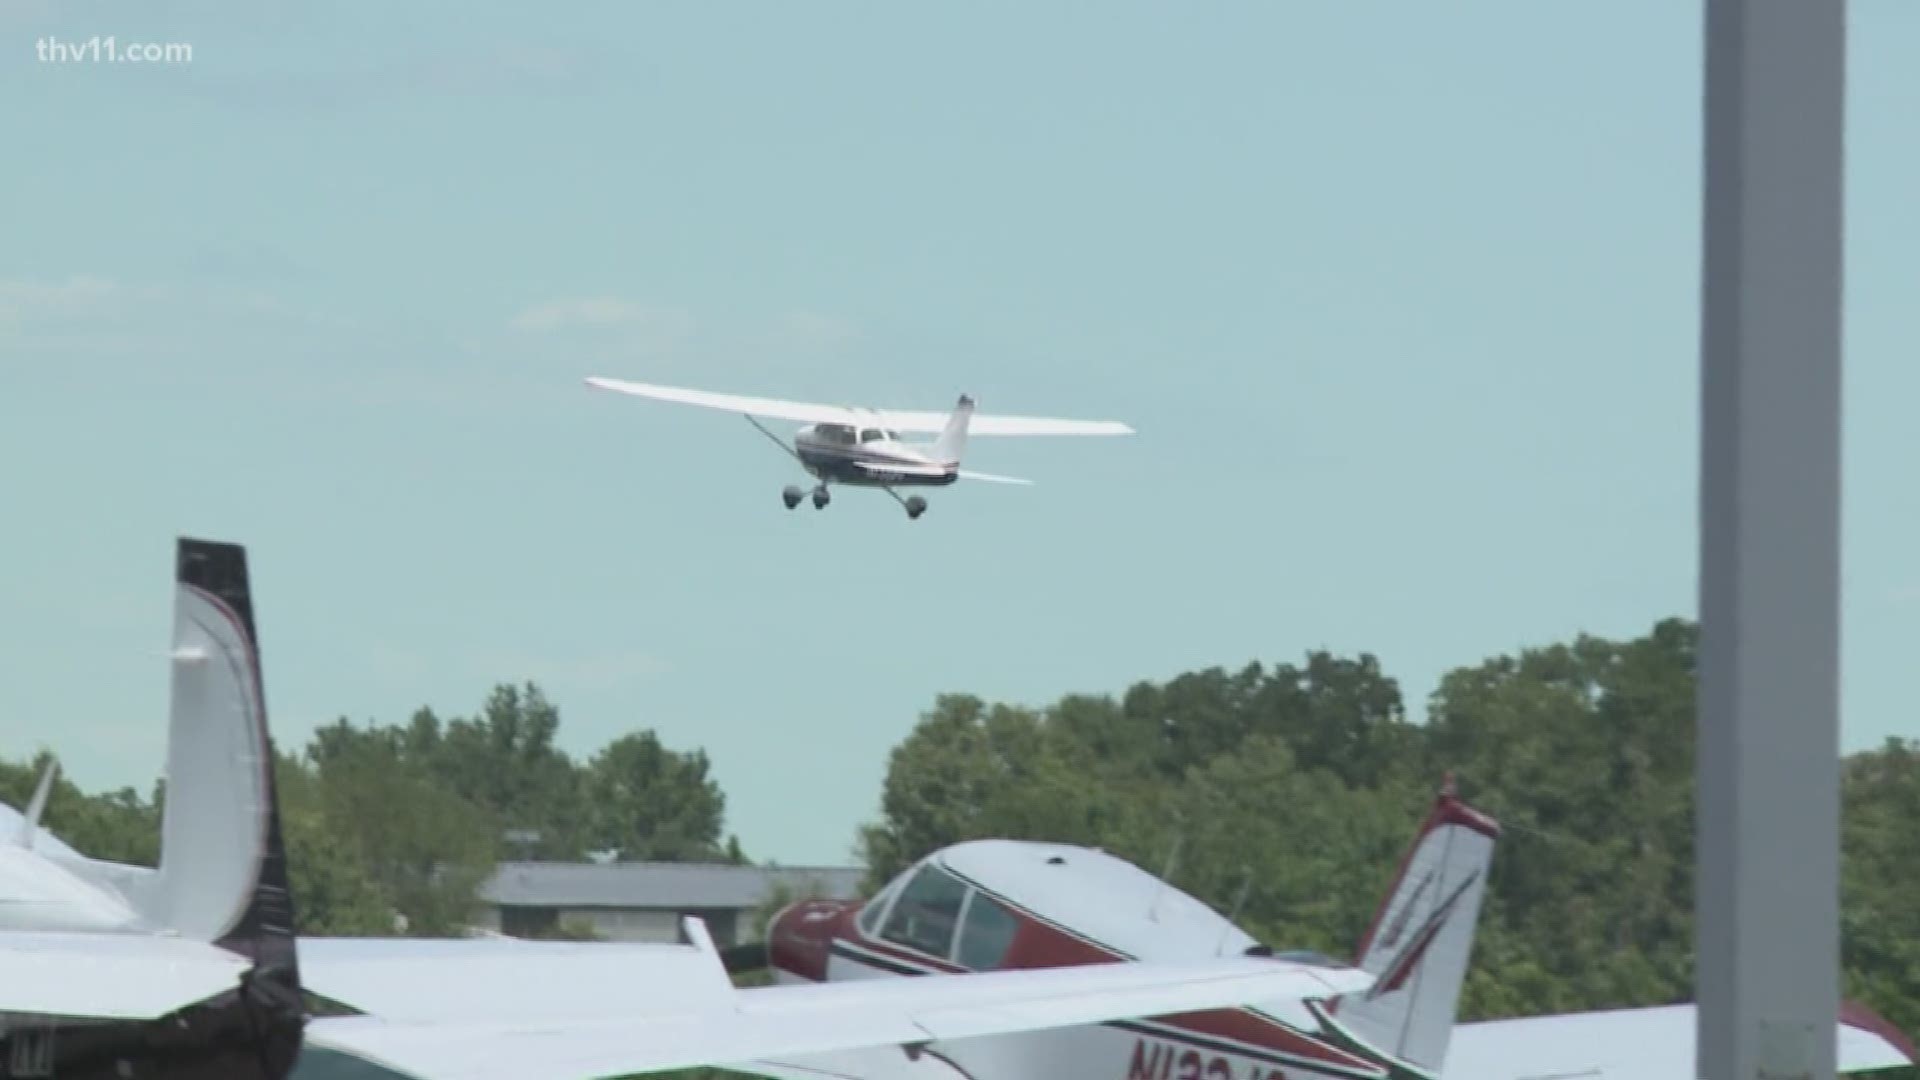 Arkansas's largest general aviation airport is getting some needed upgrades.